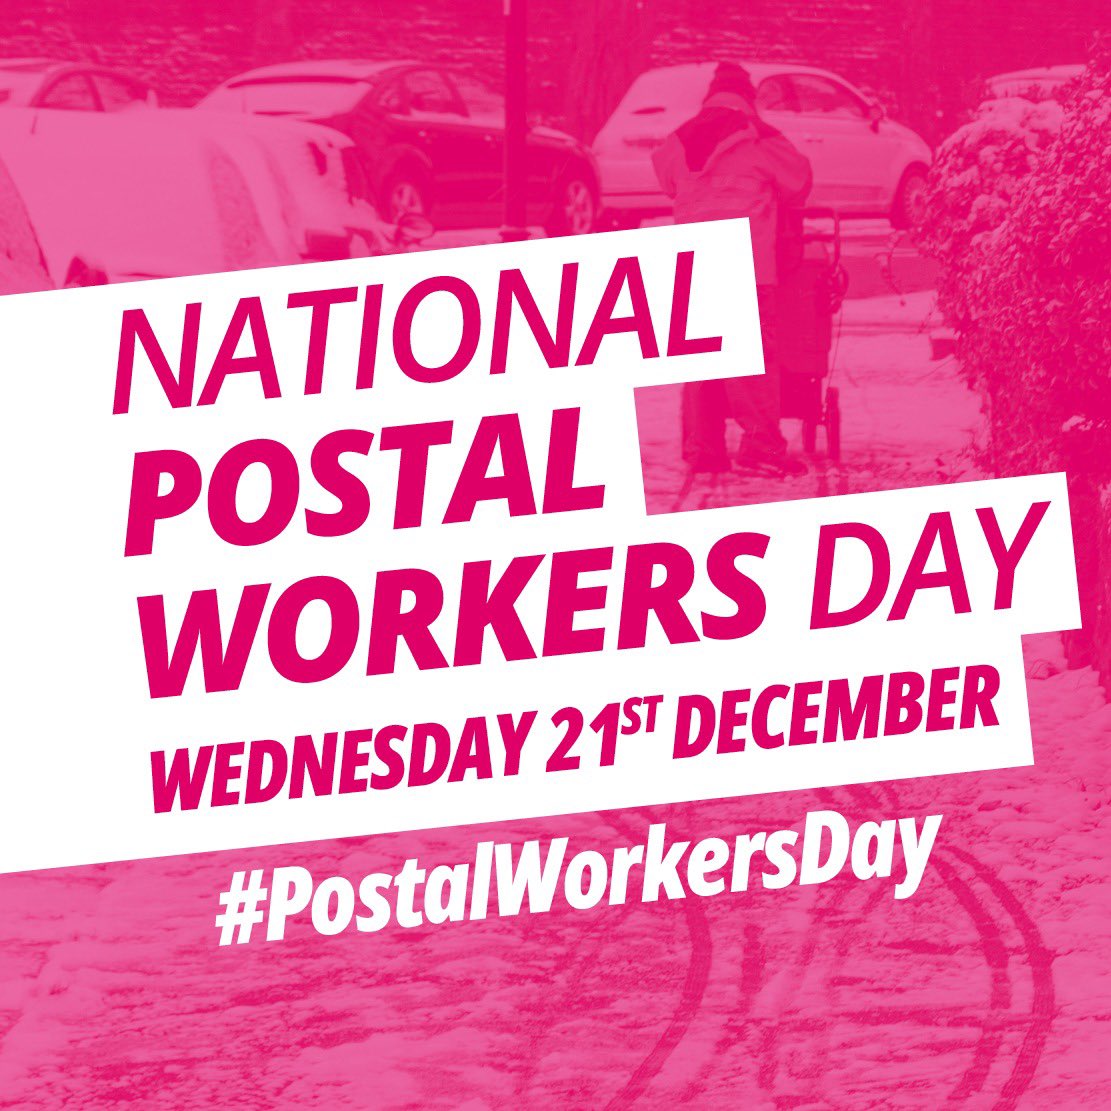 This #PostalWorkersDay, I want to say a huge thank you to postal workers across #CardiffNorth and those in our Llanishen sorting office for all your hard work in keeping our communities connected.

Thank you for everything you do 💪 

@CWUnews